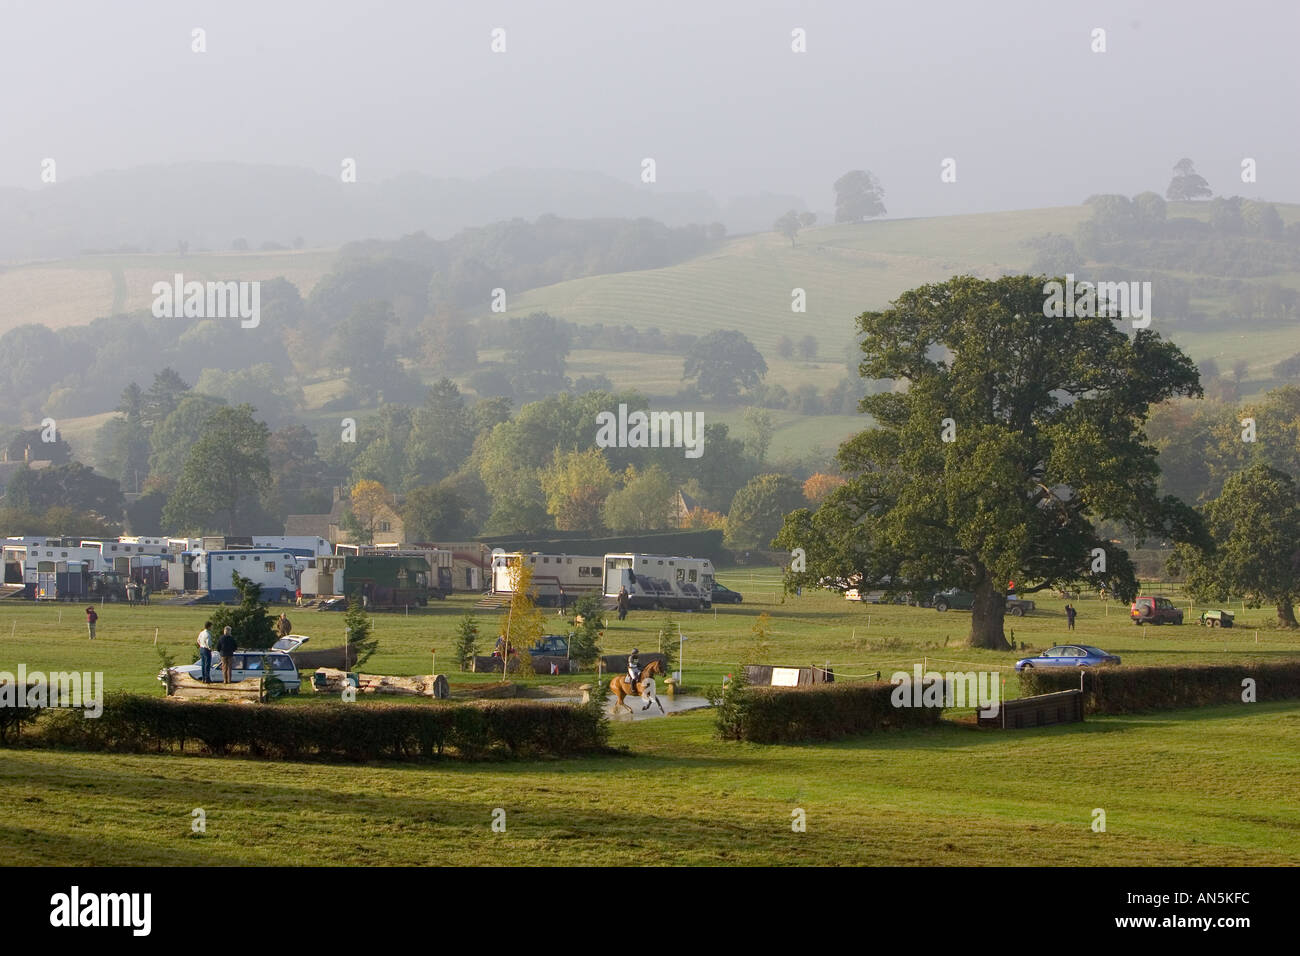 Cross country phase of Horse Trials equine event Oxfordshire United Kingdom Stock Photo